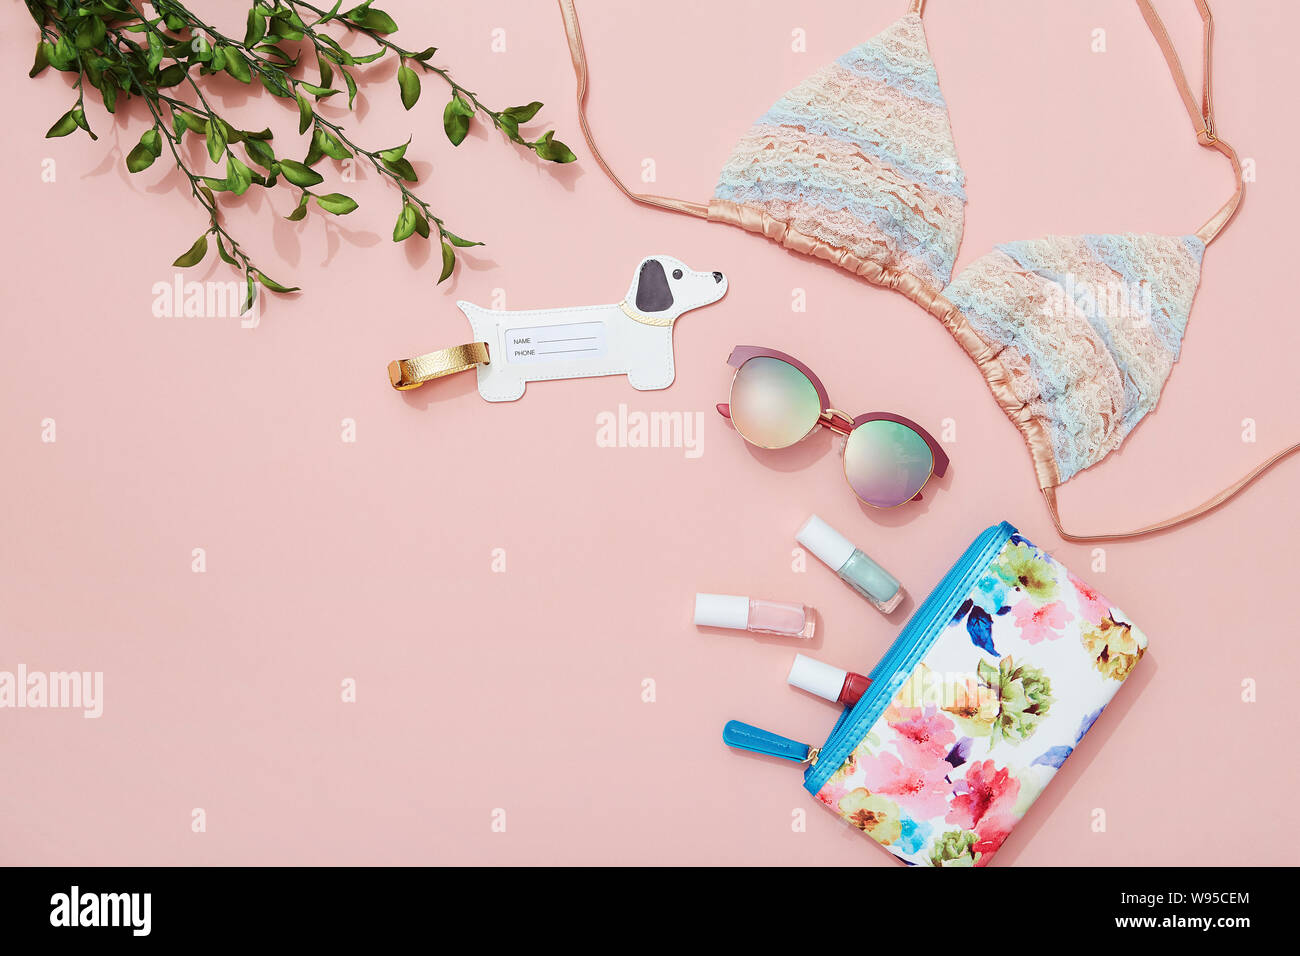 Young woman beach holiday fashion and beauty products and accessories flat lay on pink background Stock Photo